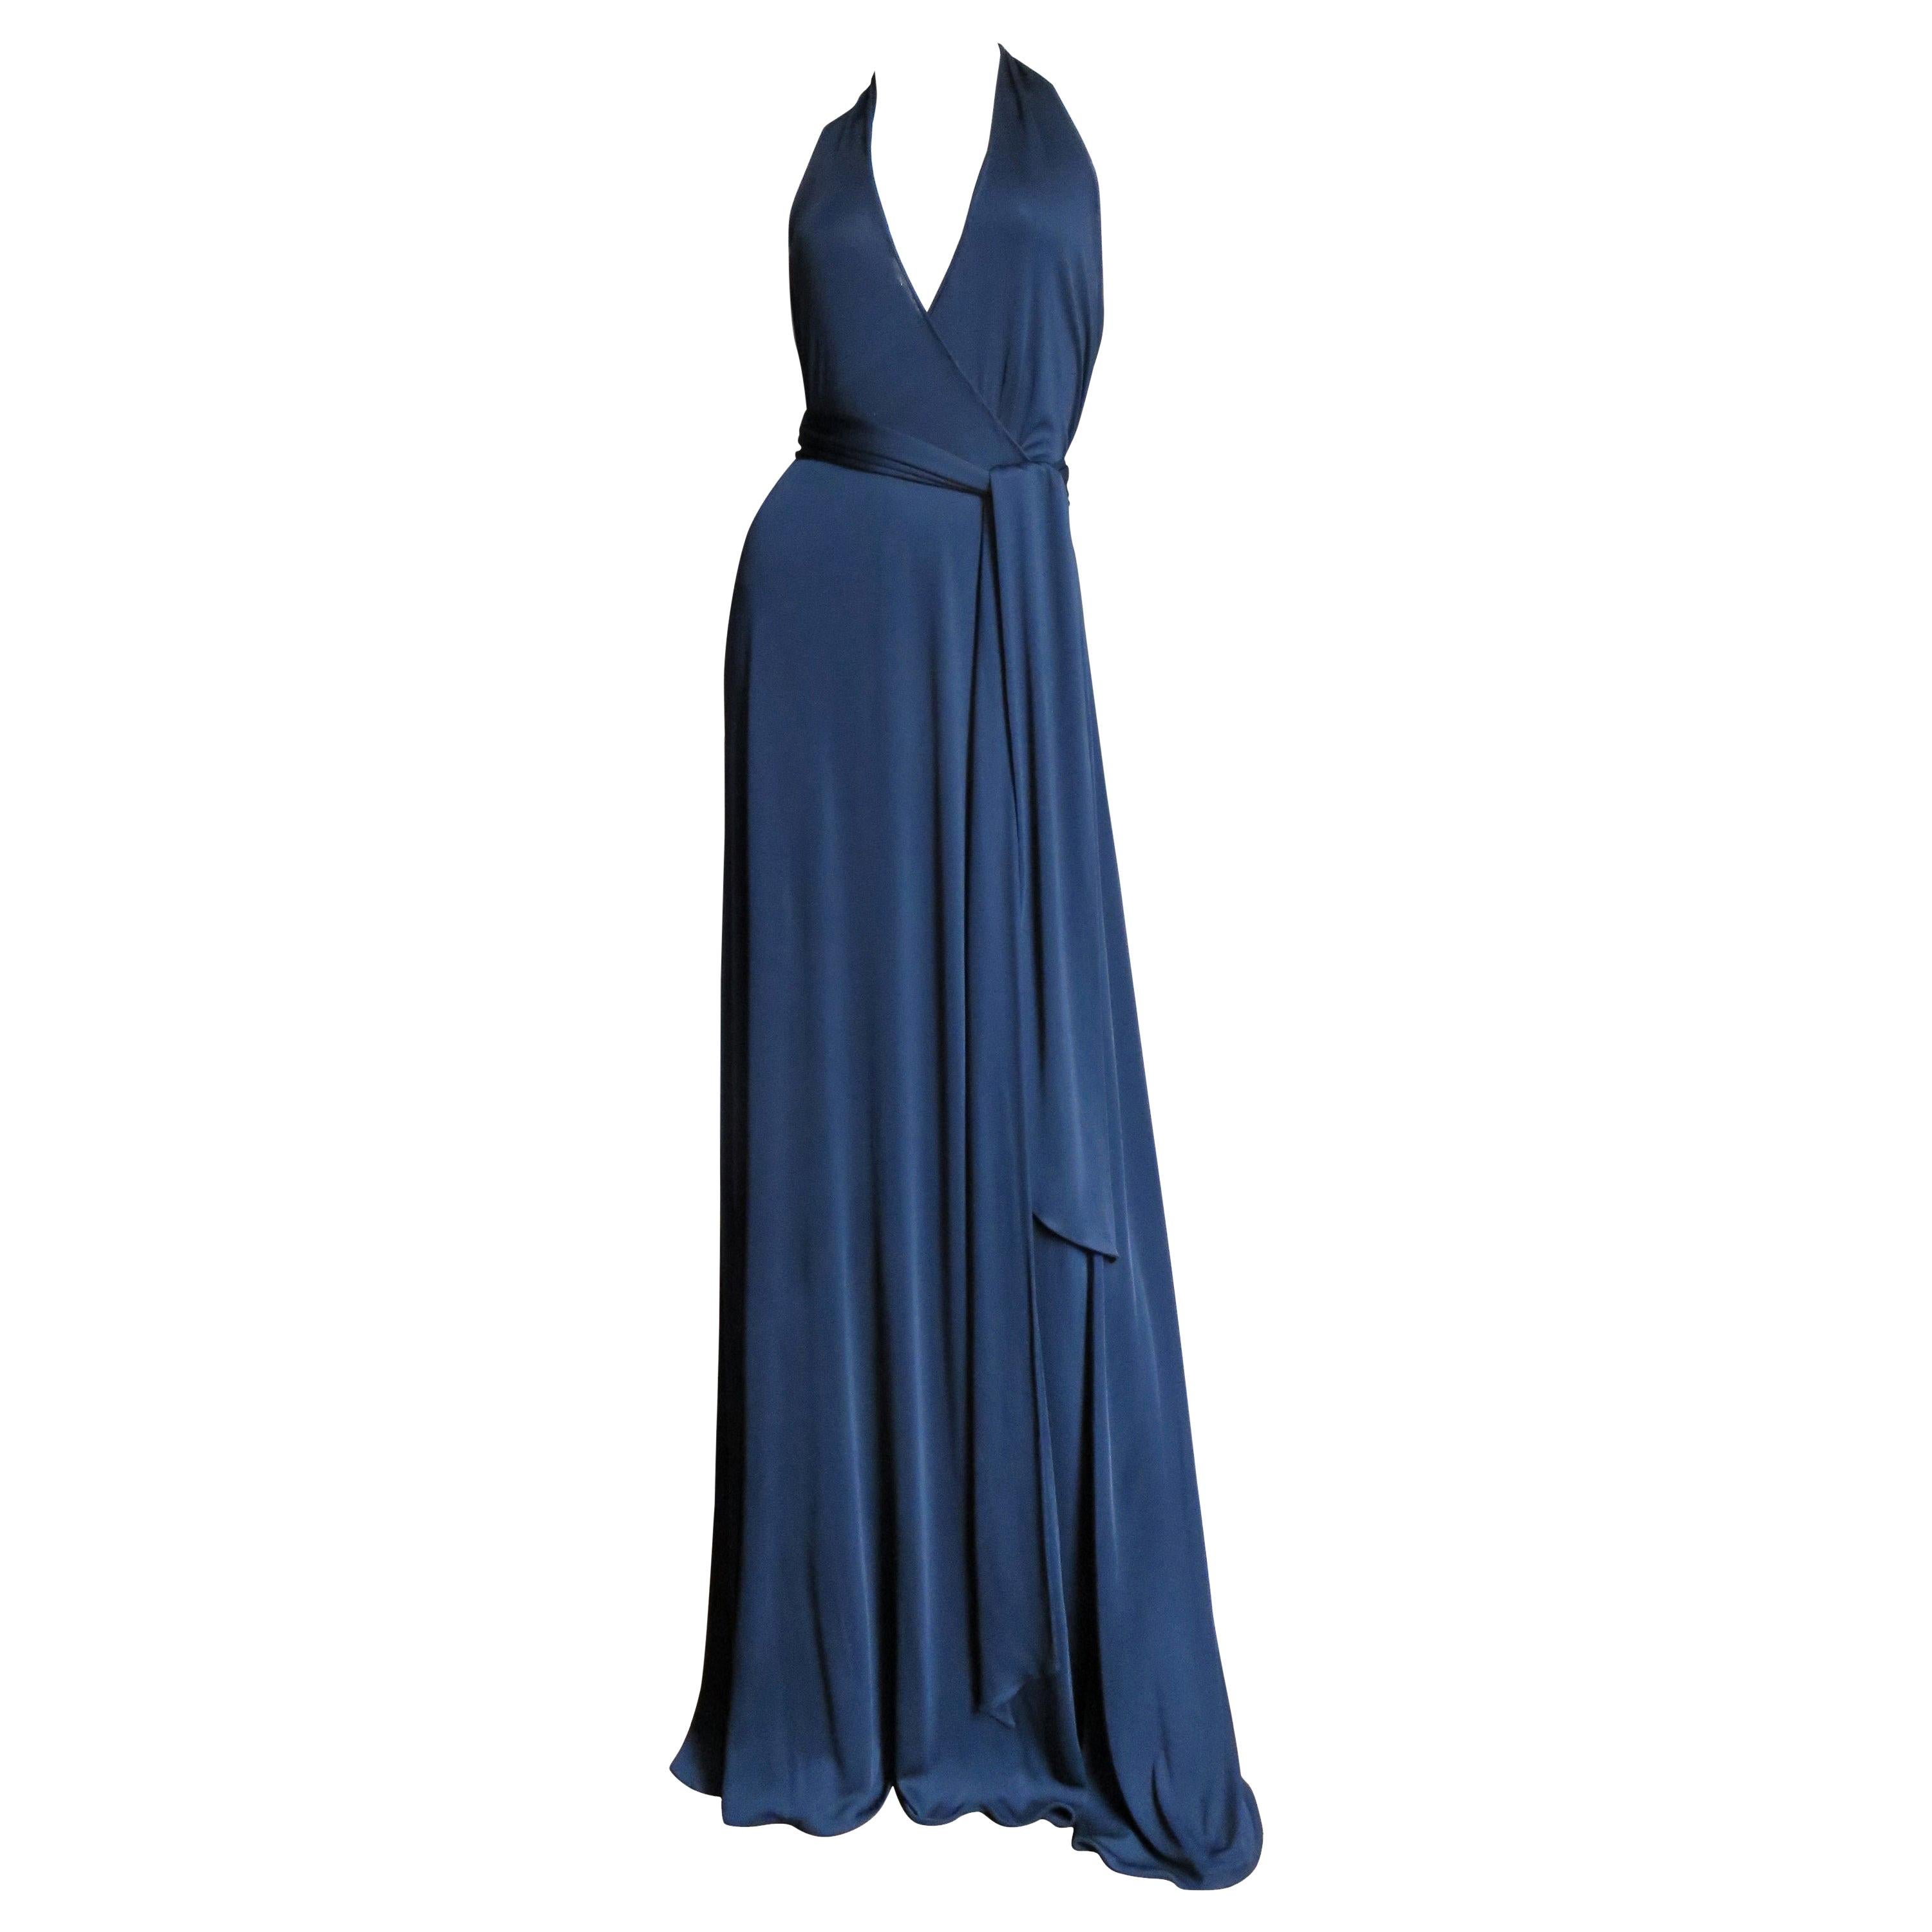 Tom Ford for Gucci Navy Silk Wrap Halter Dress